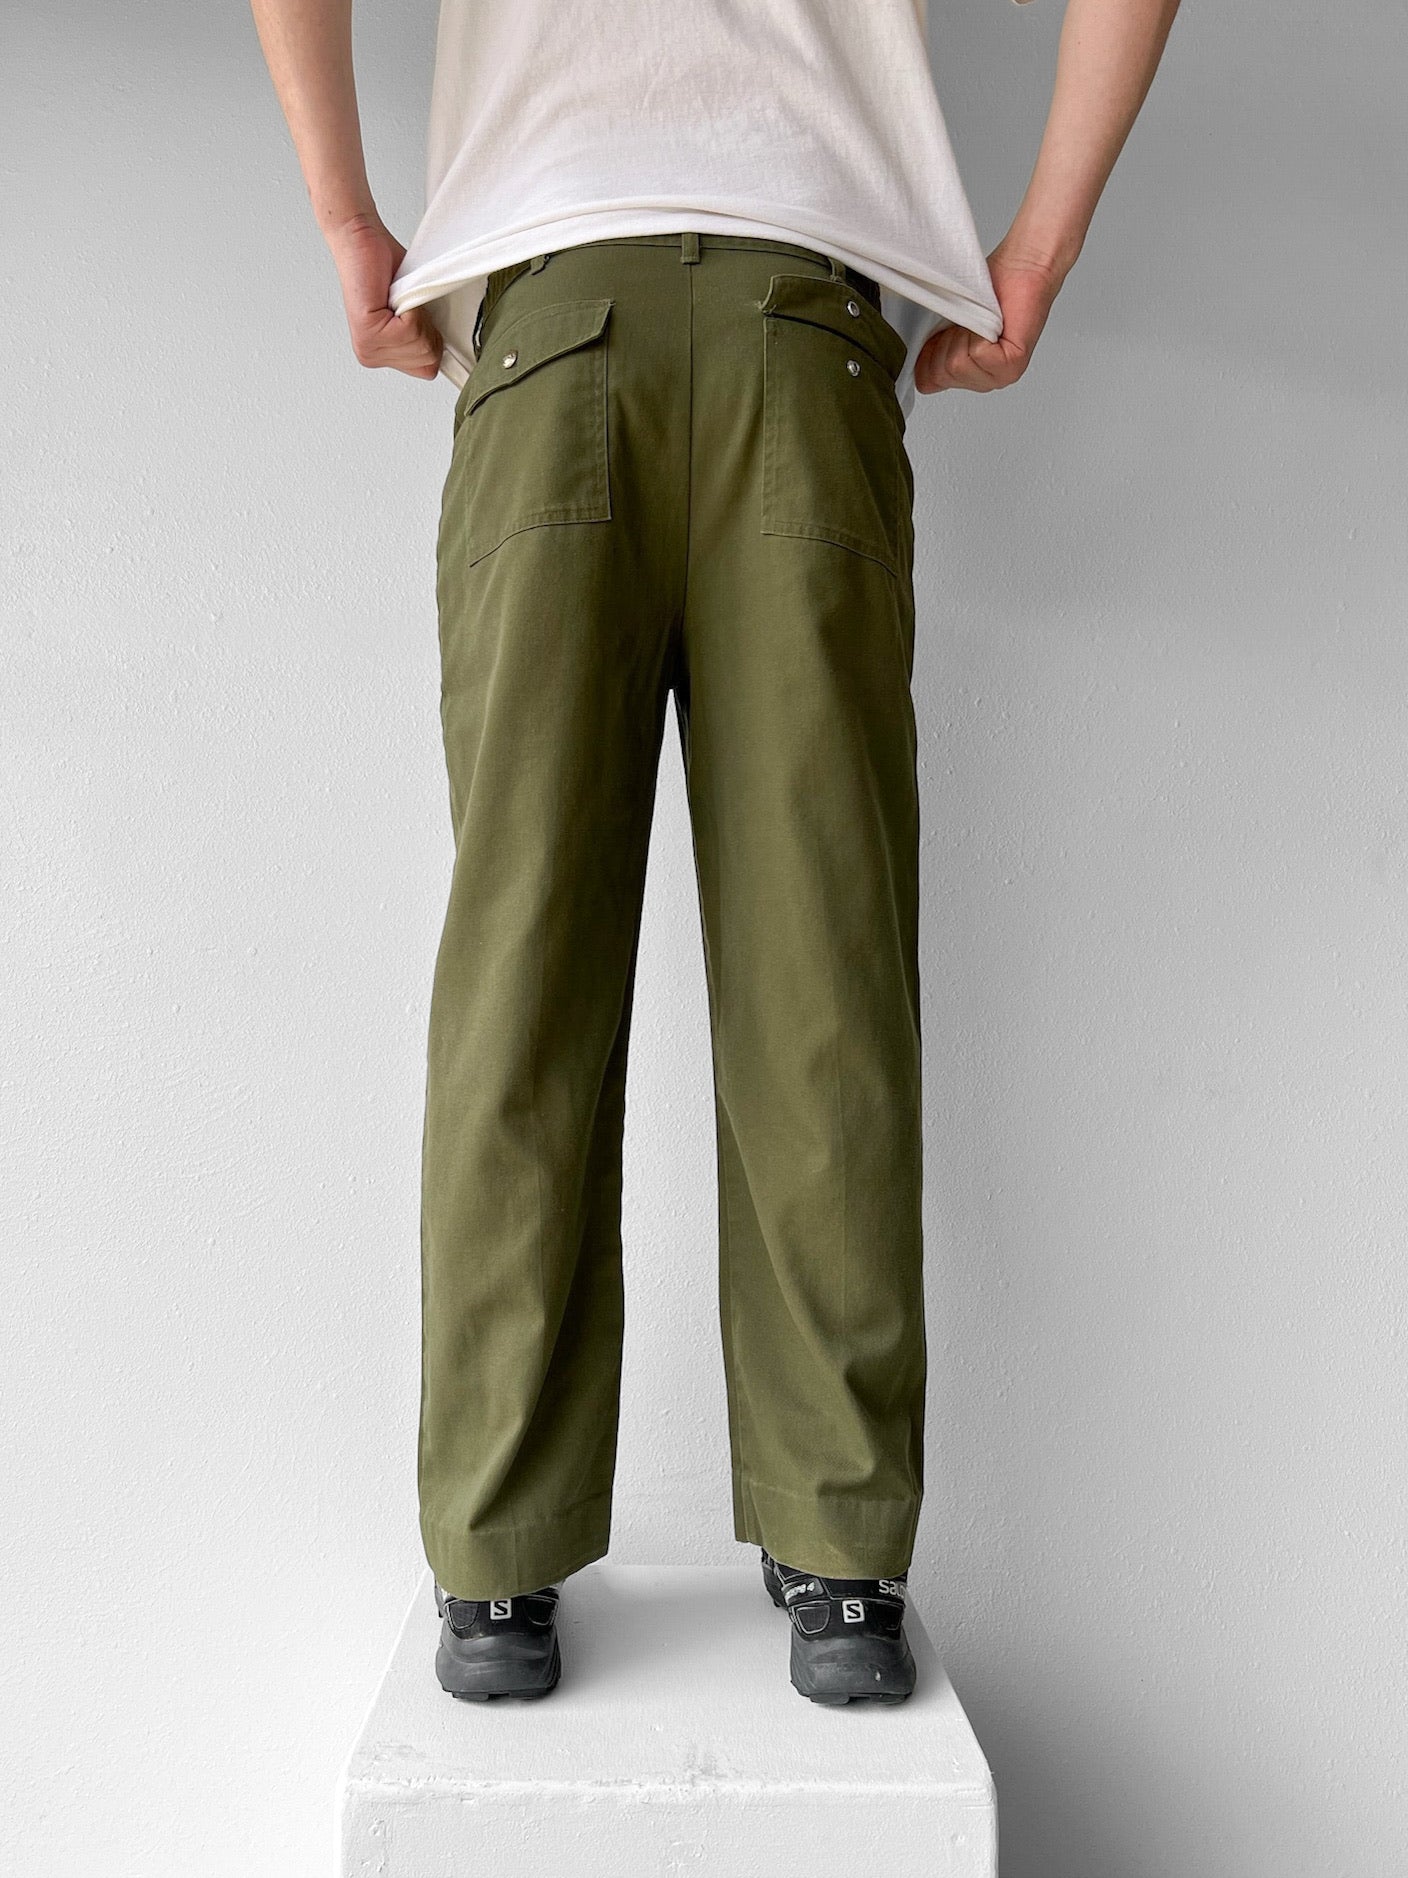 90’s Boy Scout Military Style Cargo Pants - 33 x 33